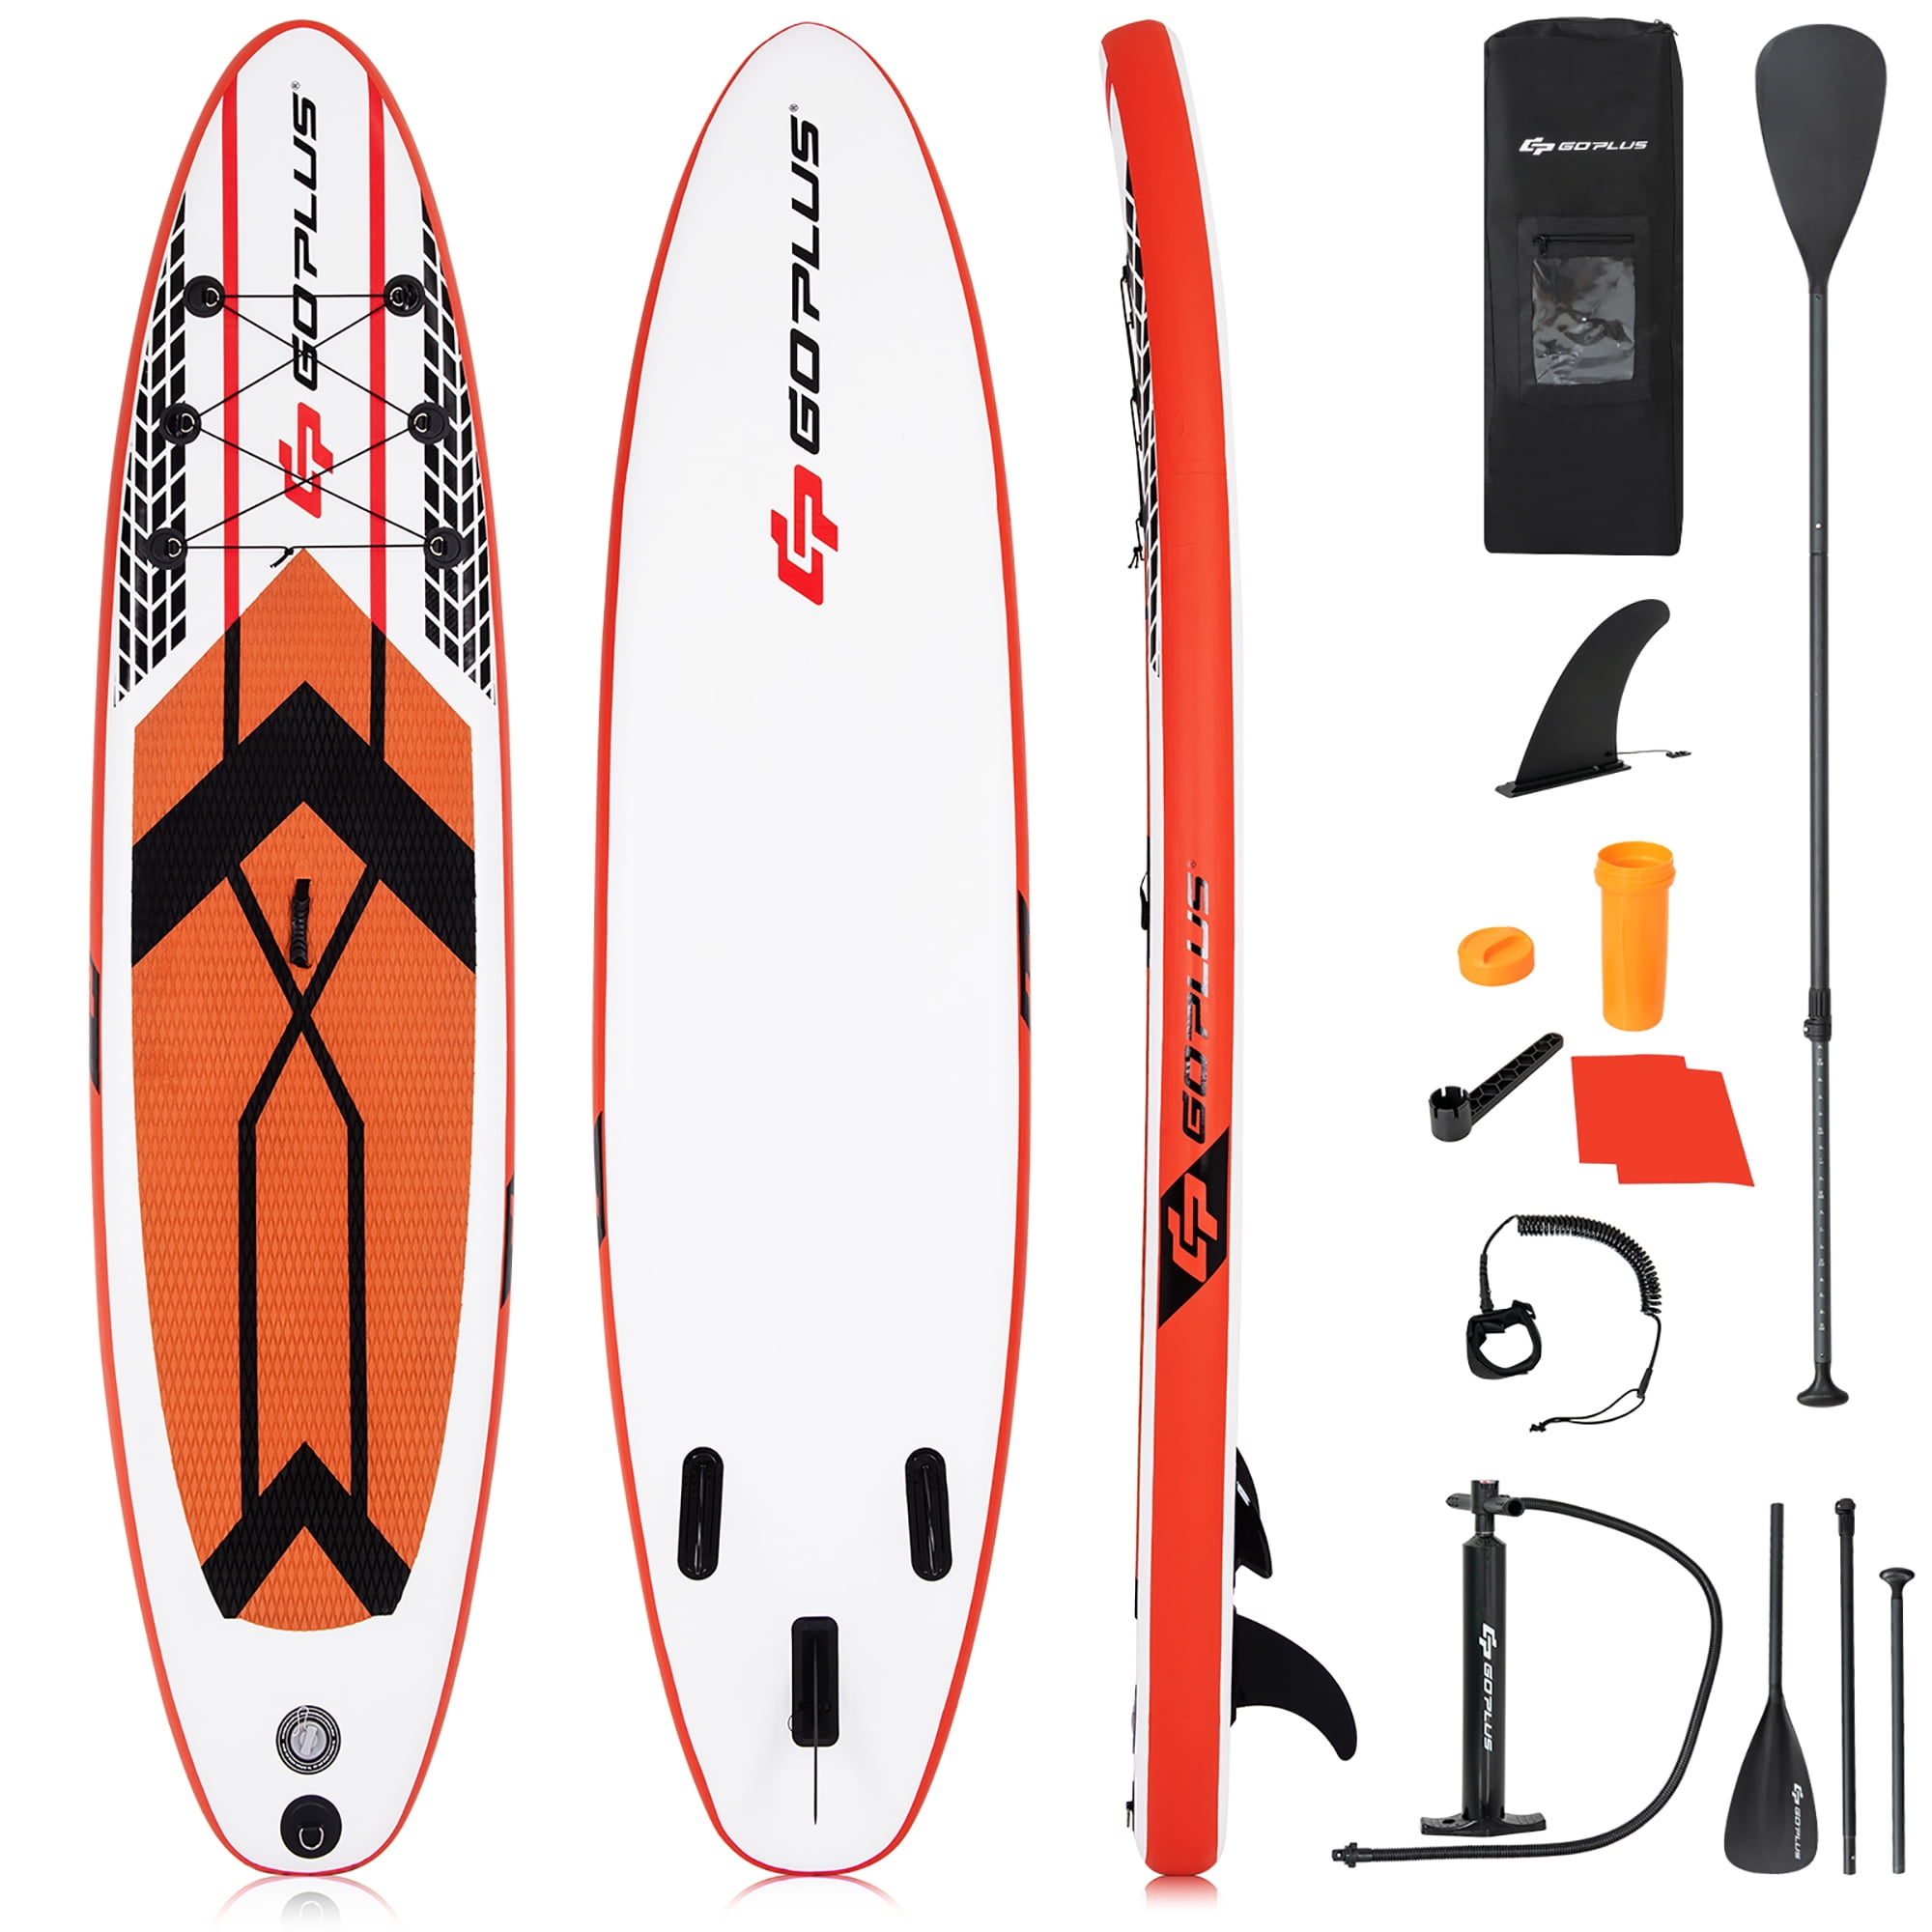 BV Sports Inflatable Paddle Boards 10 Feet Paddle Board With Adjustable Paddle 6 Thick Base For Maximum Stability & Balance Has All SUP Accessories & Carry Bag Ideal For Beginners 